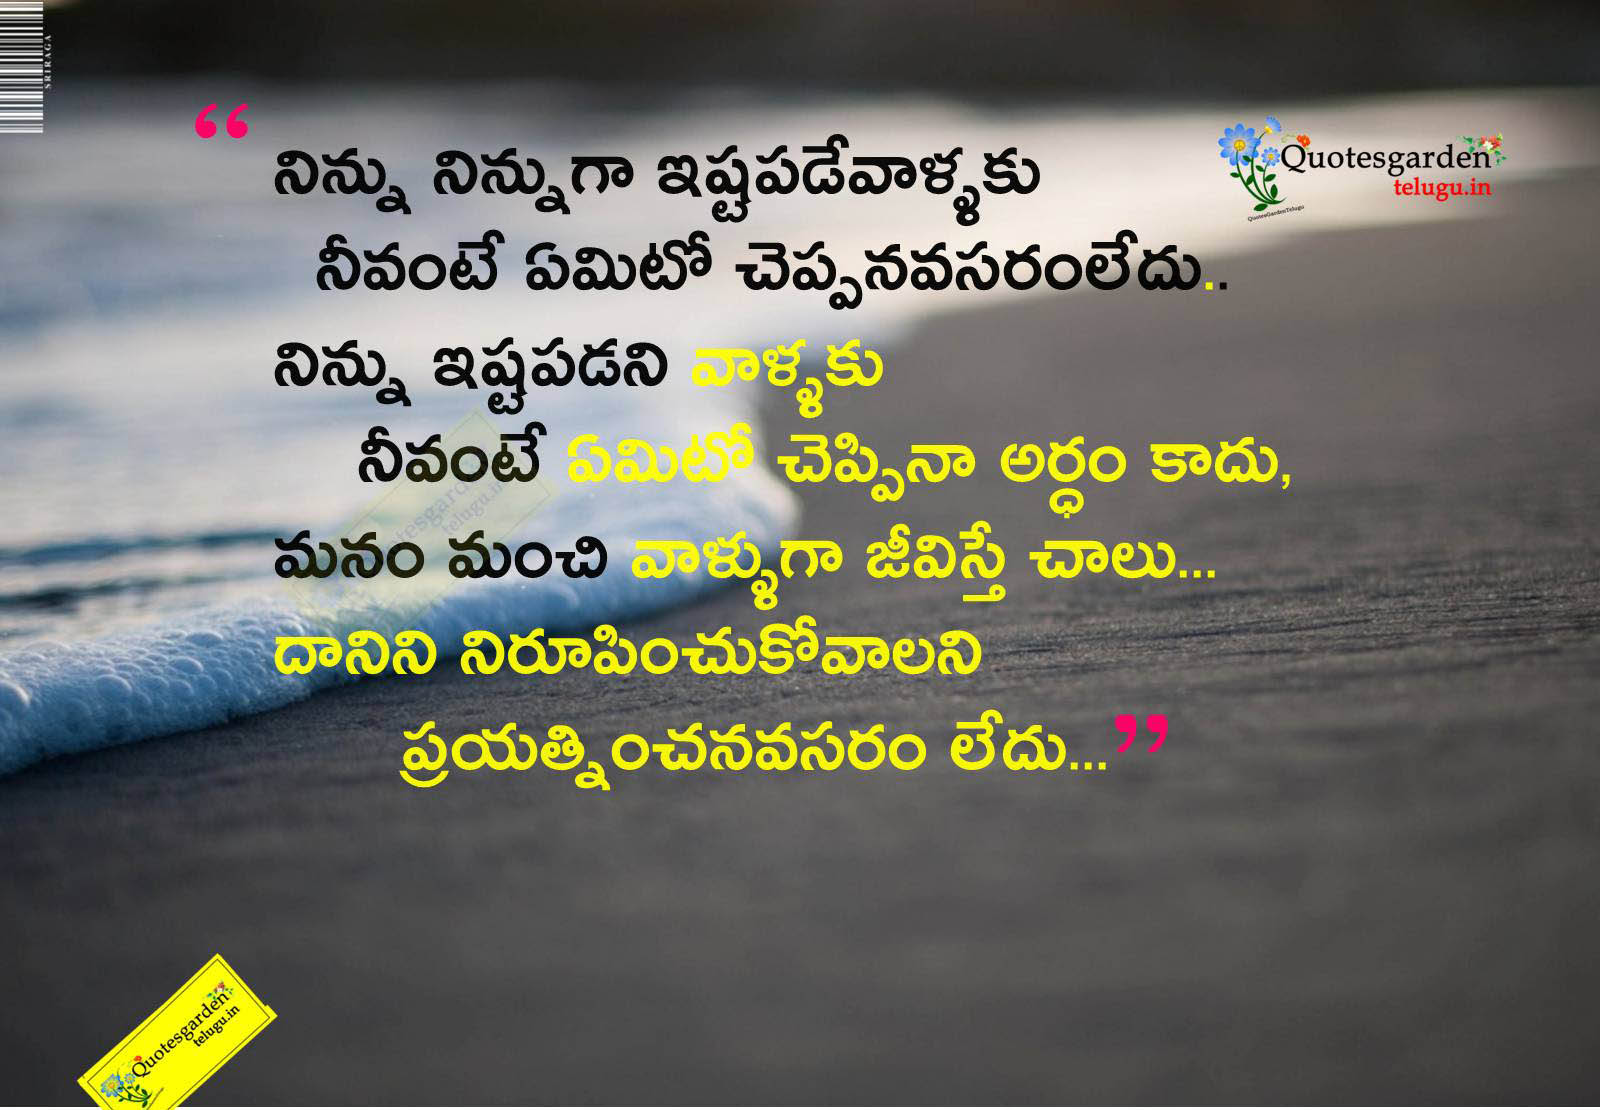 Heart Touching Love And Inspirational Quotes In Telugu Quotes Garden Telugu Telugu Quotes English Quotes Hindi Quotes